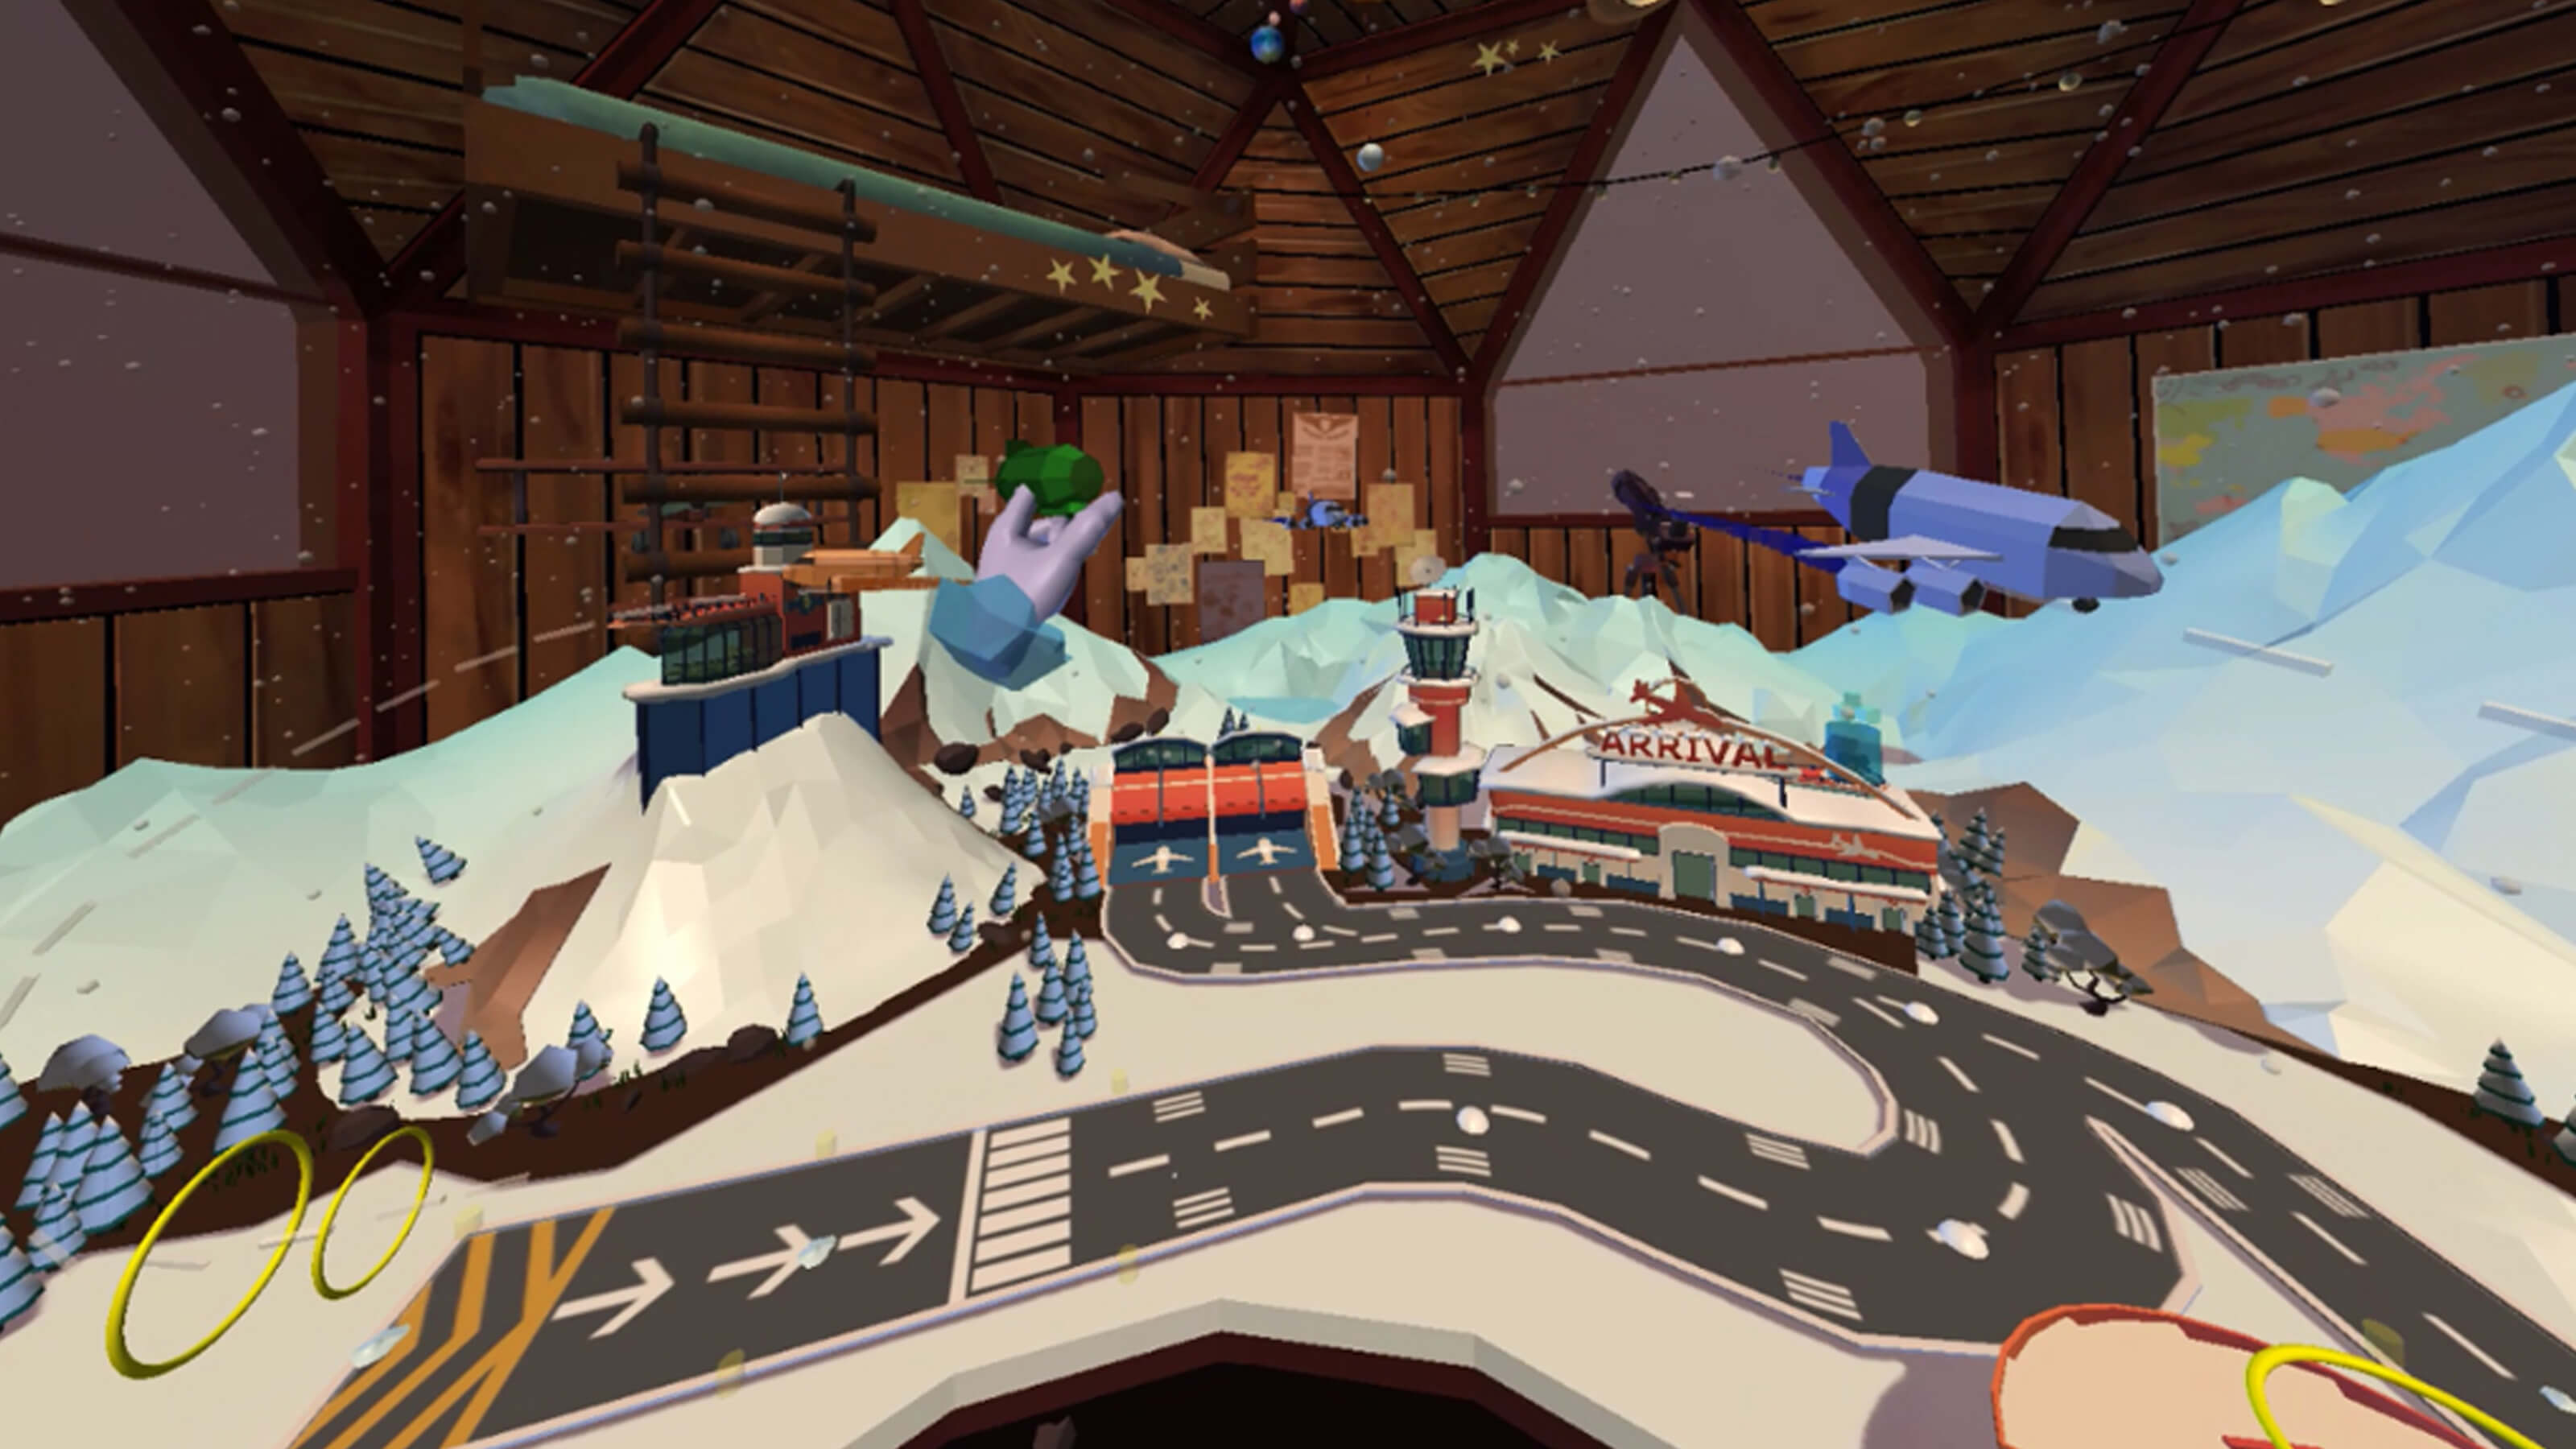 A snowy 3D modeled airport sit inside a wood-paneled room. The player's disembodied hand can be seen manipulating aircraft.